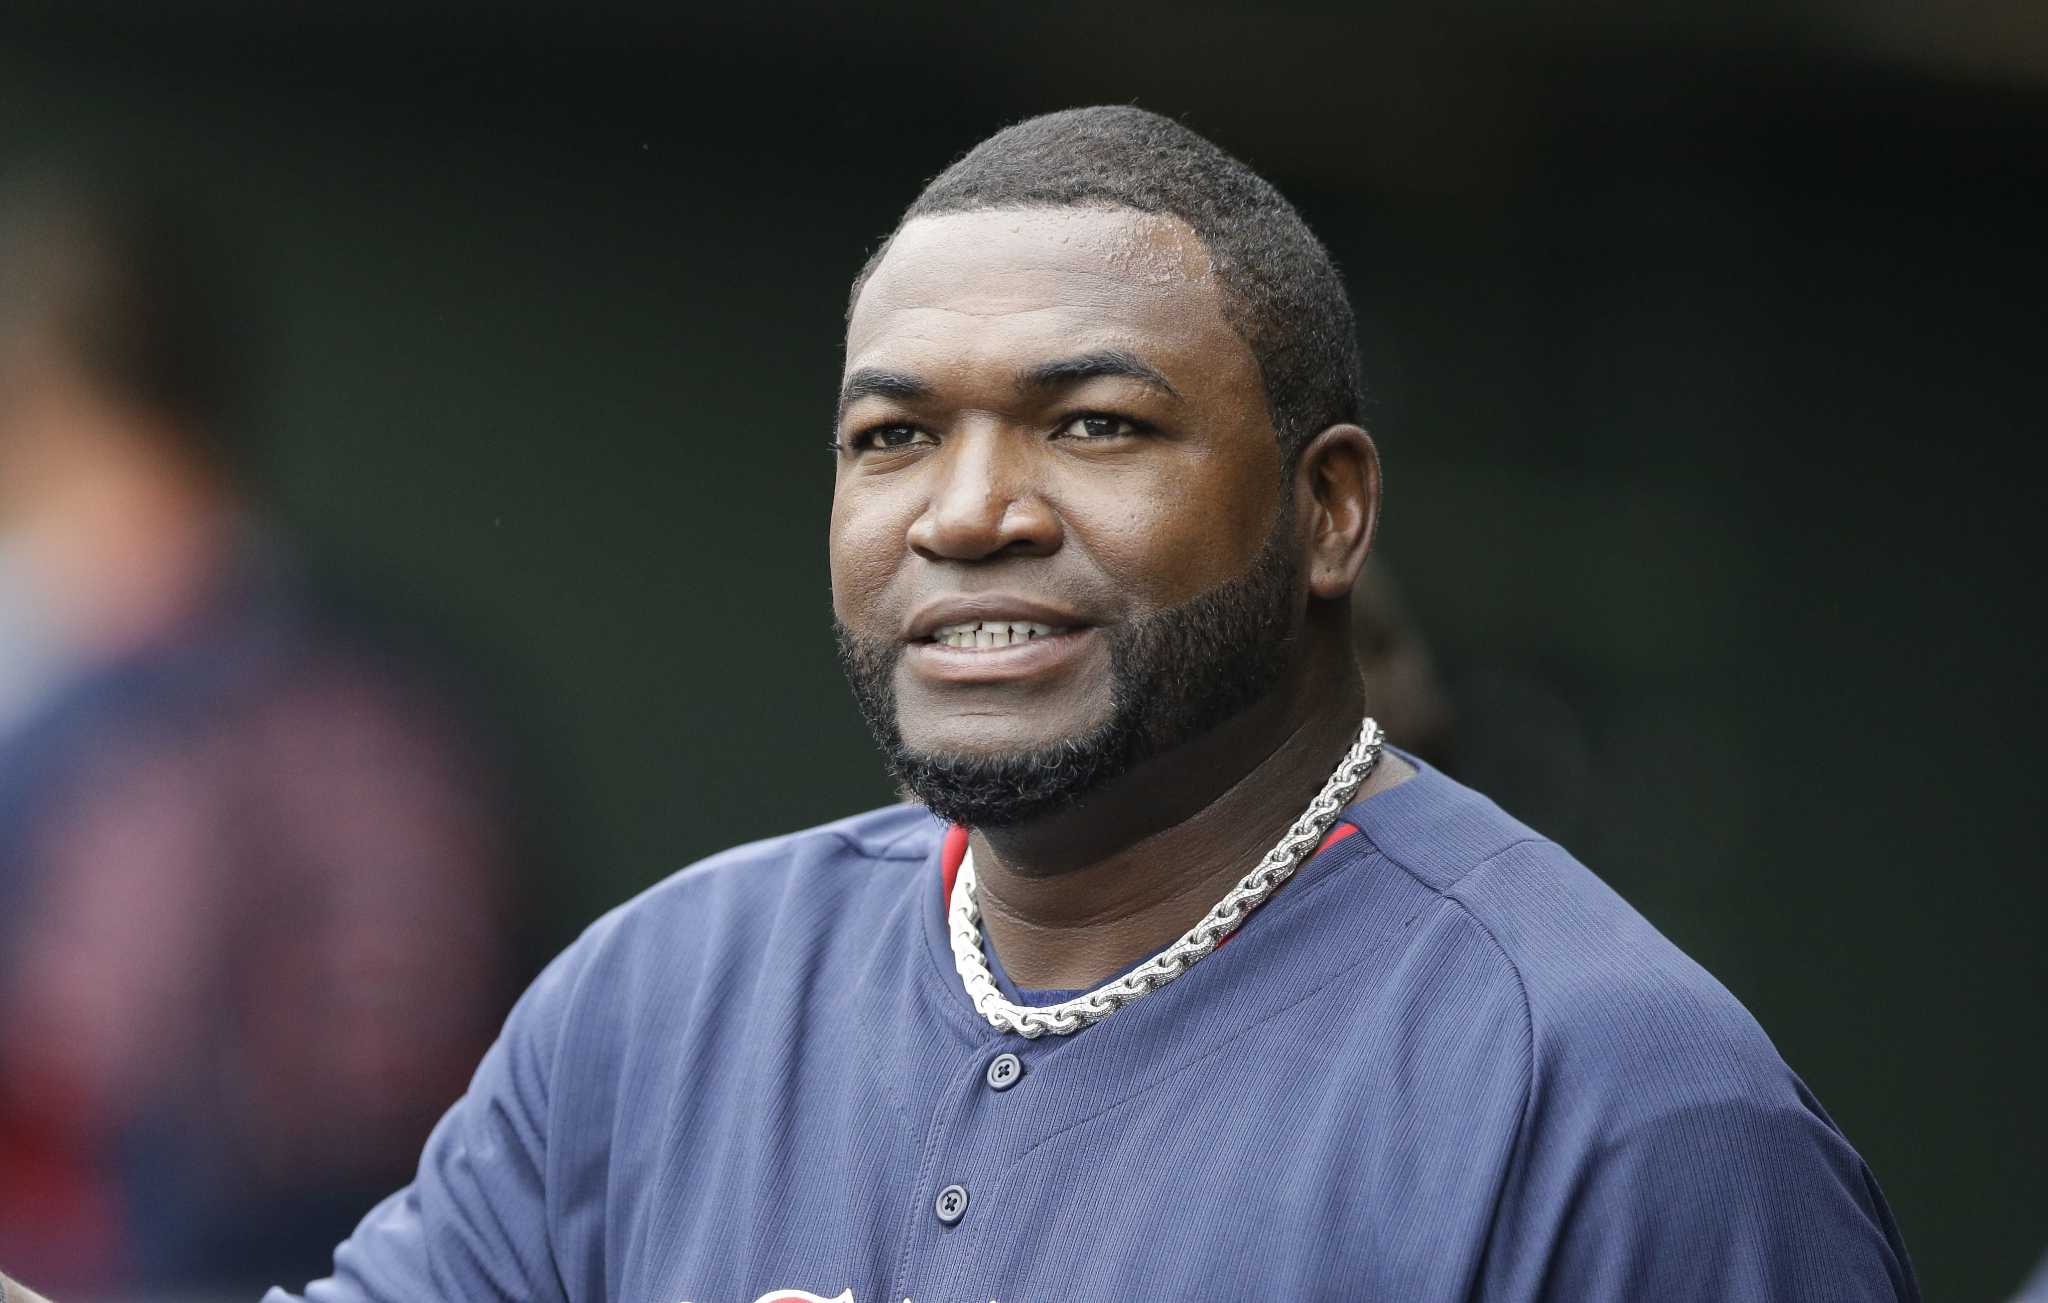 David Ortiz is a month into a low-carb diet that has helped him